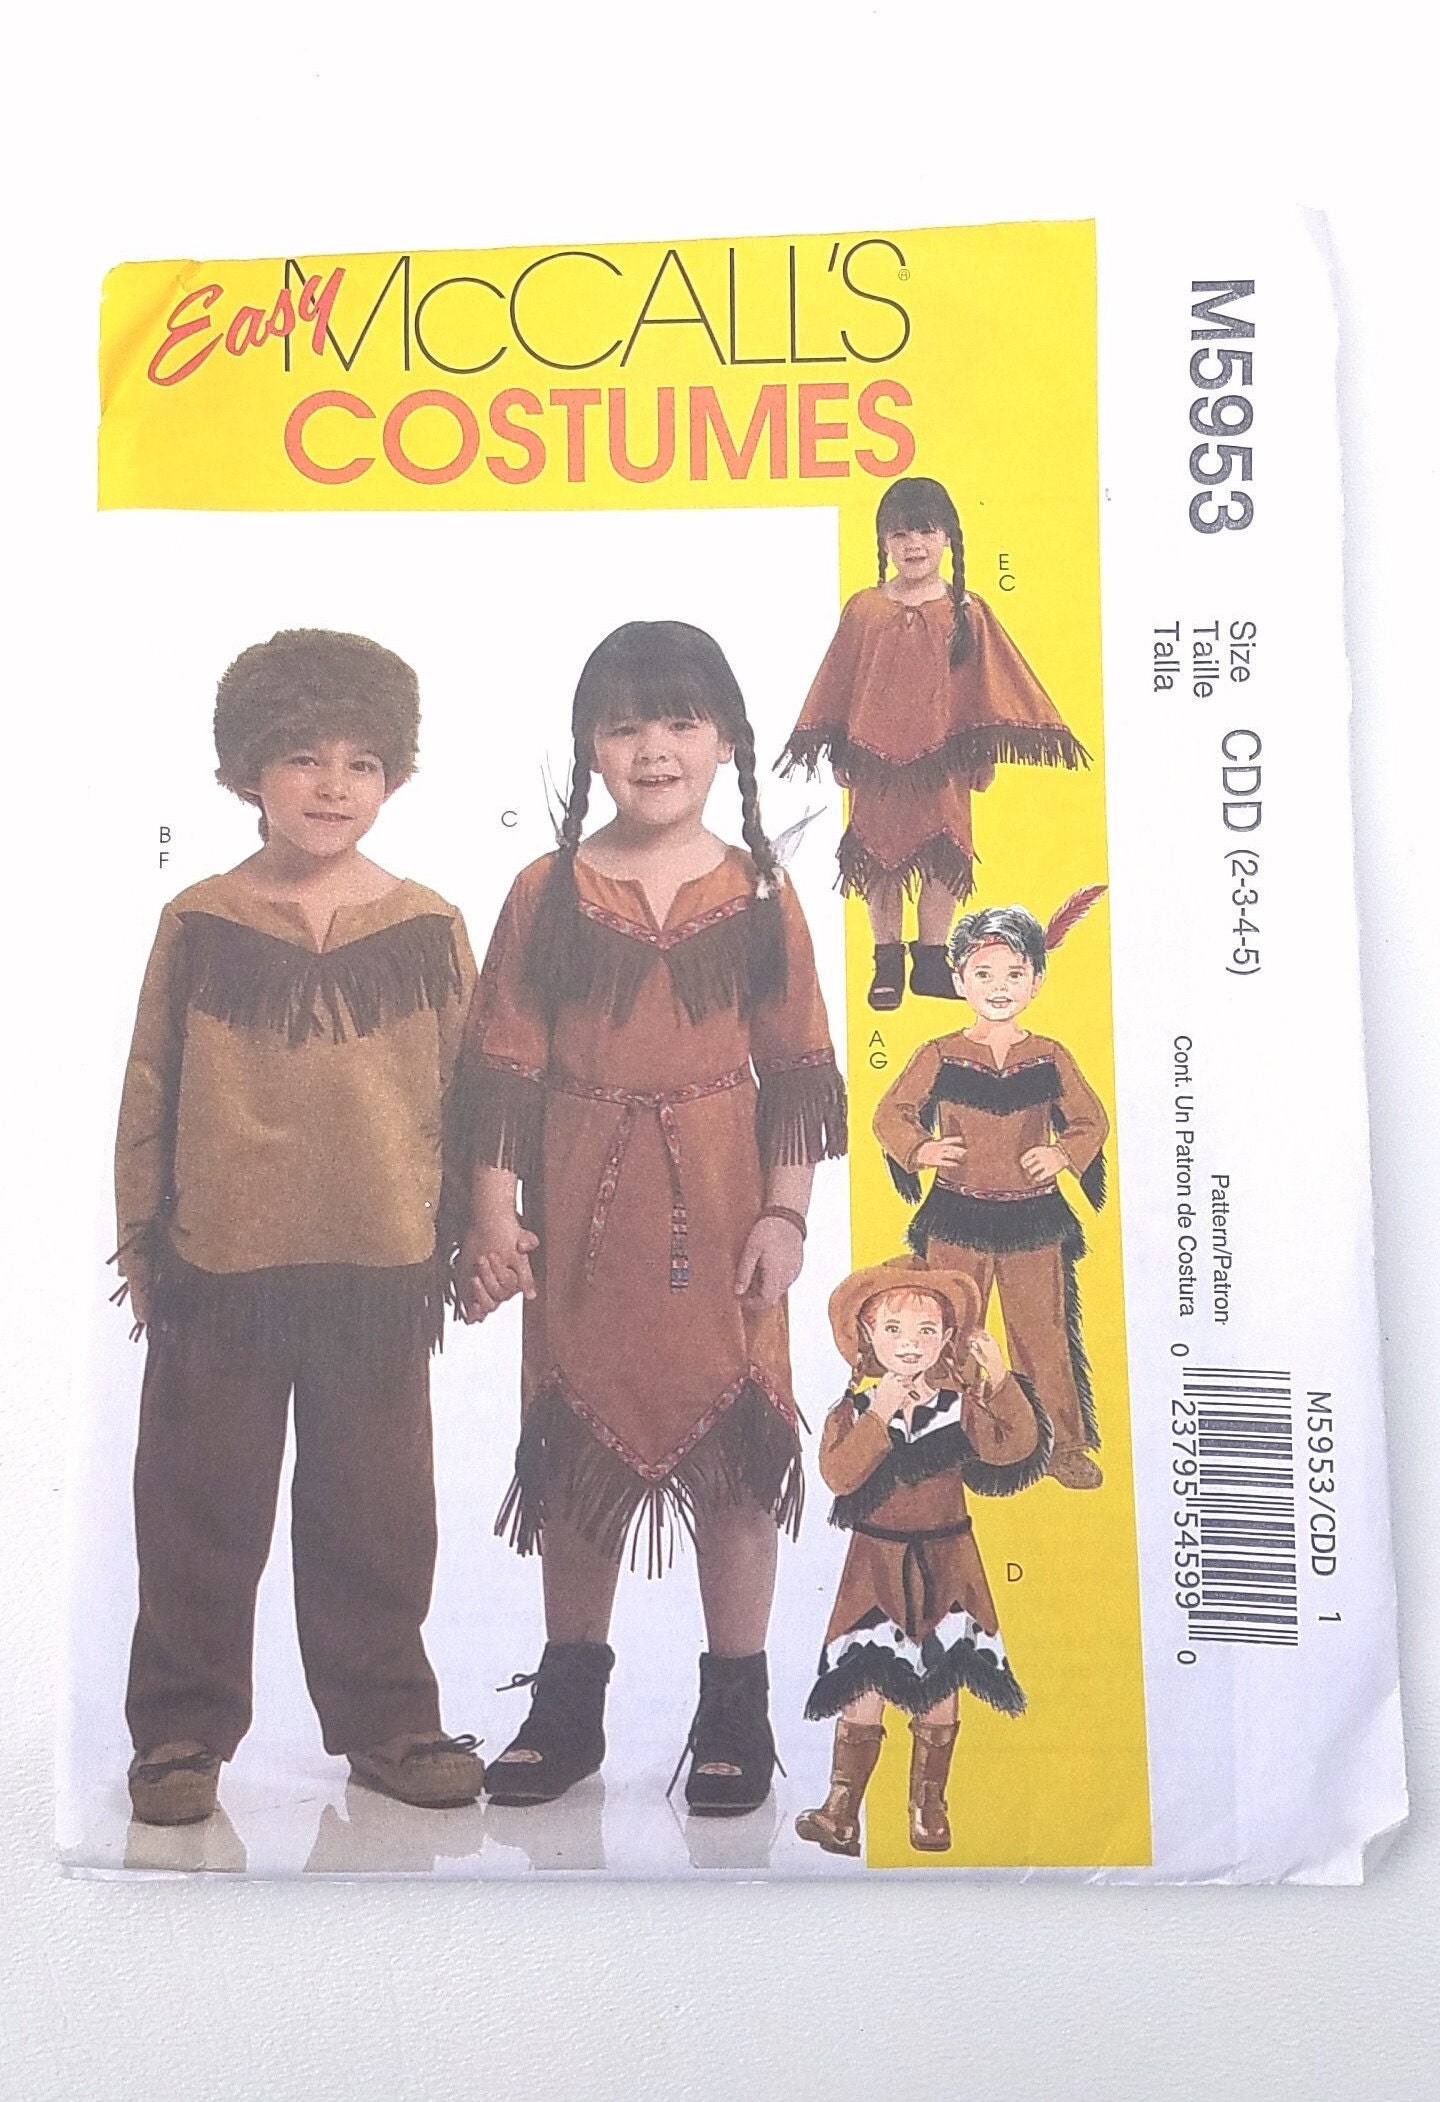  McCall's 8868 Sewing Pattern Childrens 2 Hour Costumes Cowboy &  Indians Size 7-8 : Arts, Crafts & Sewing